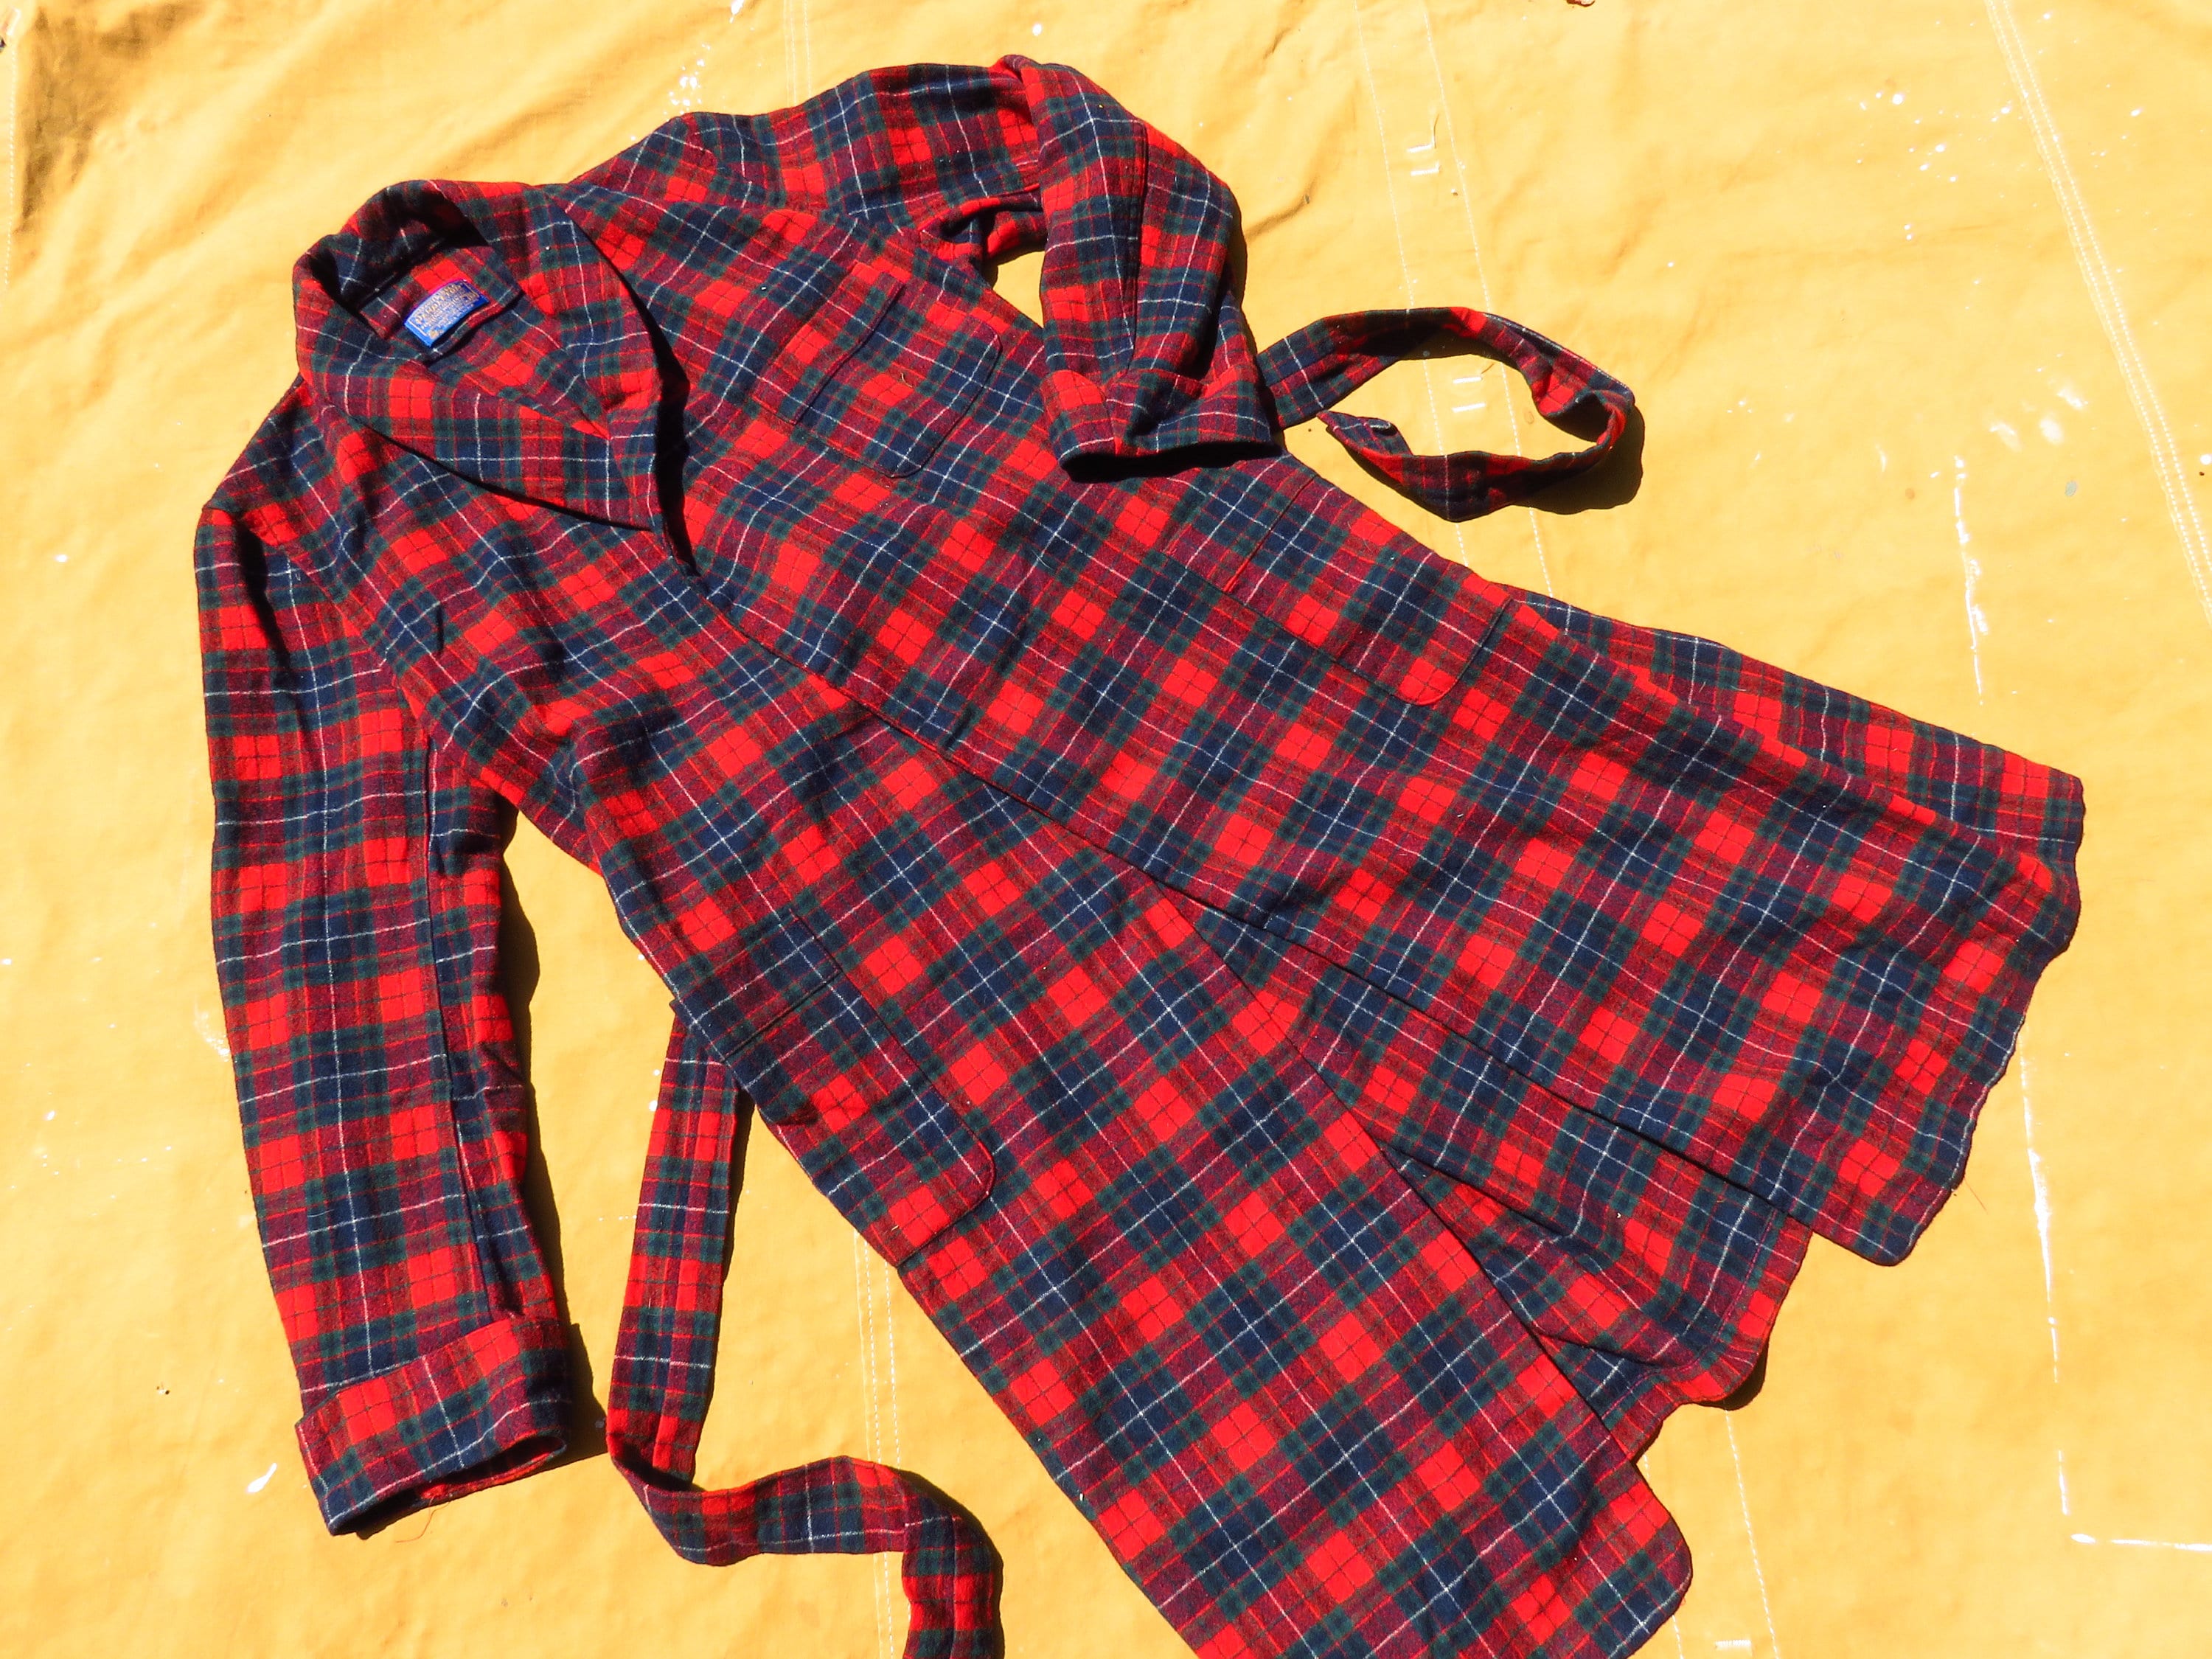 Made in USA 1980s 1990s Medium 80s  90s Pendleton Wool Bathrobe  Red Plaid Flannel